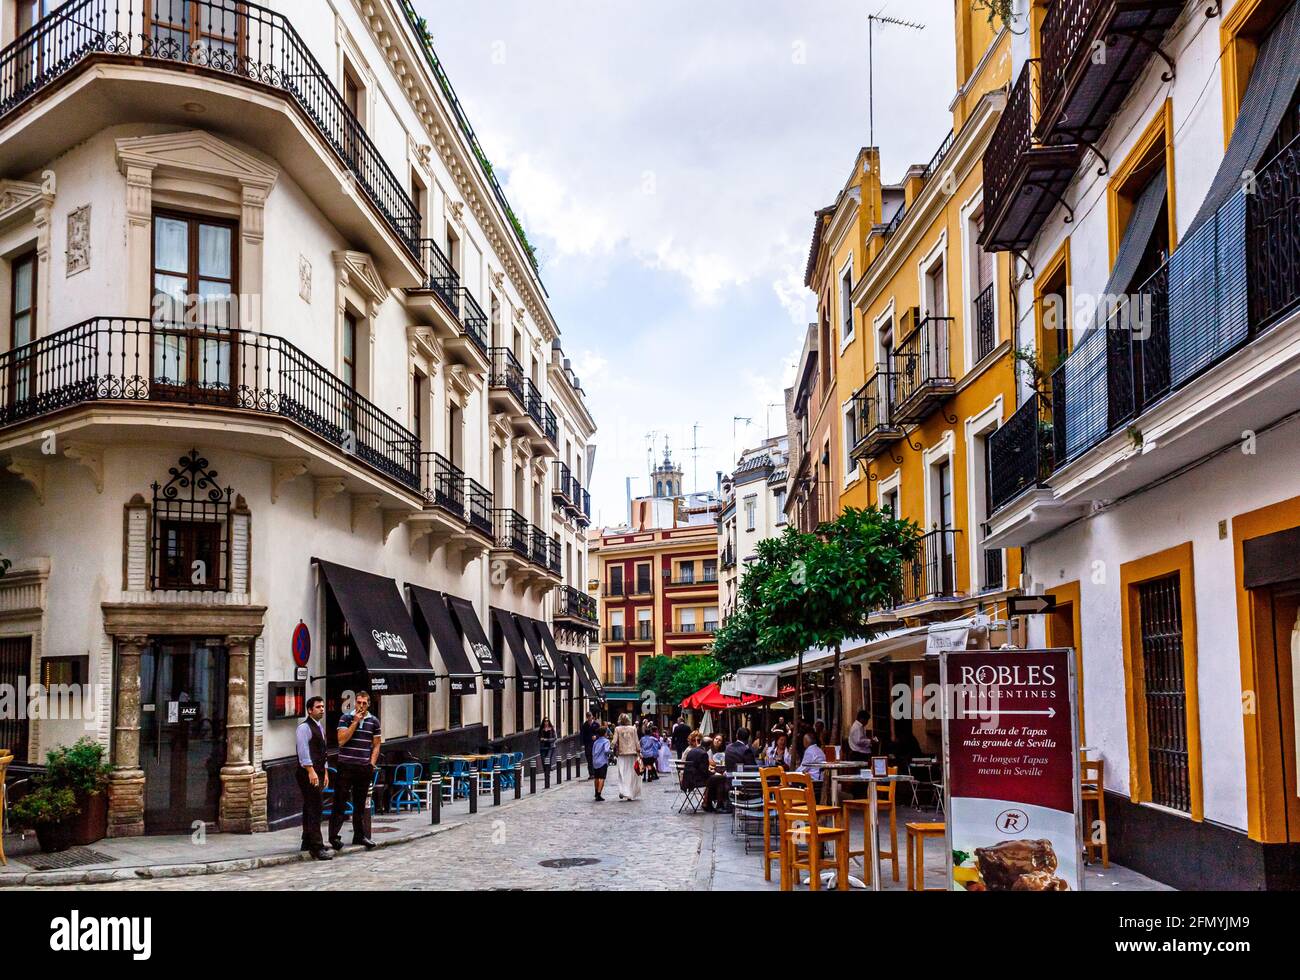 Seville, Andalusia, Spain - May 18, 2013: Romantic spanish restaurants and taverns on the street (calle) Argote de Molina. Stock Photo